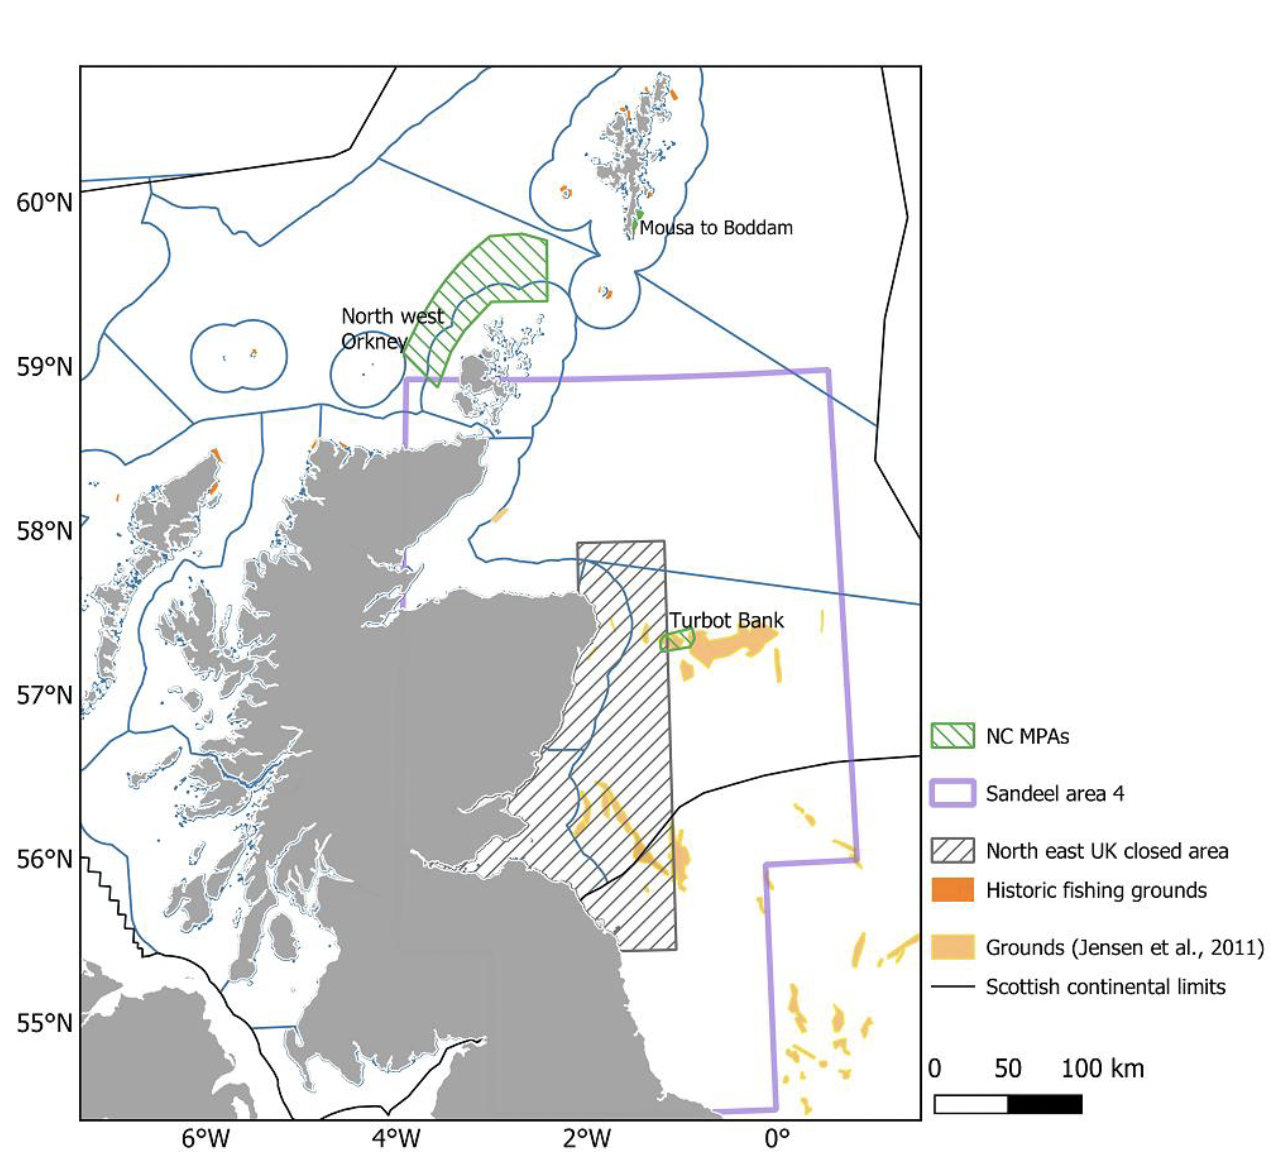 A map of the waters around Scotland indicating the location of NCMPAs (Mousa to Boddam in Shetland, NW Orkney and Turbot Bank), the Area 4 closed area and known sandeel fishing grounds. Around 27% of the historical fishing grounds are located within the closed area. 